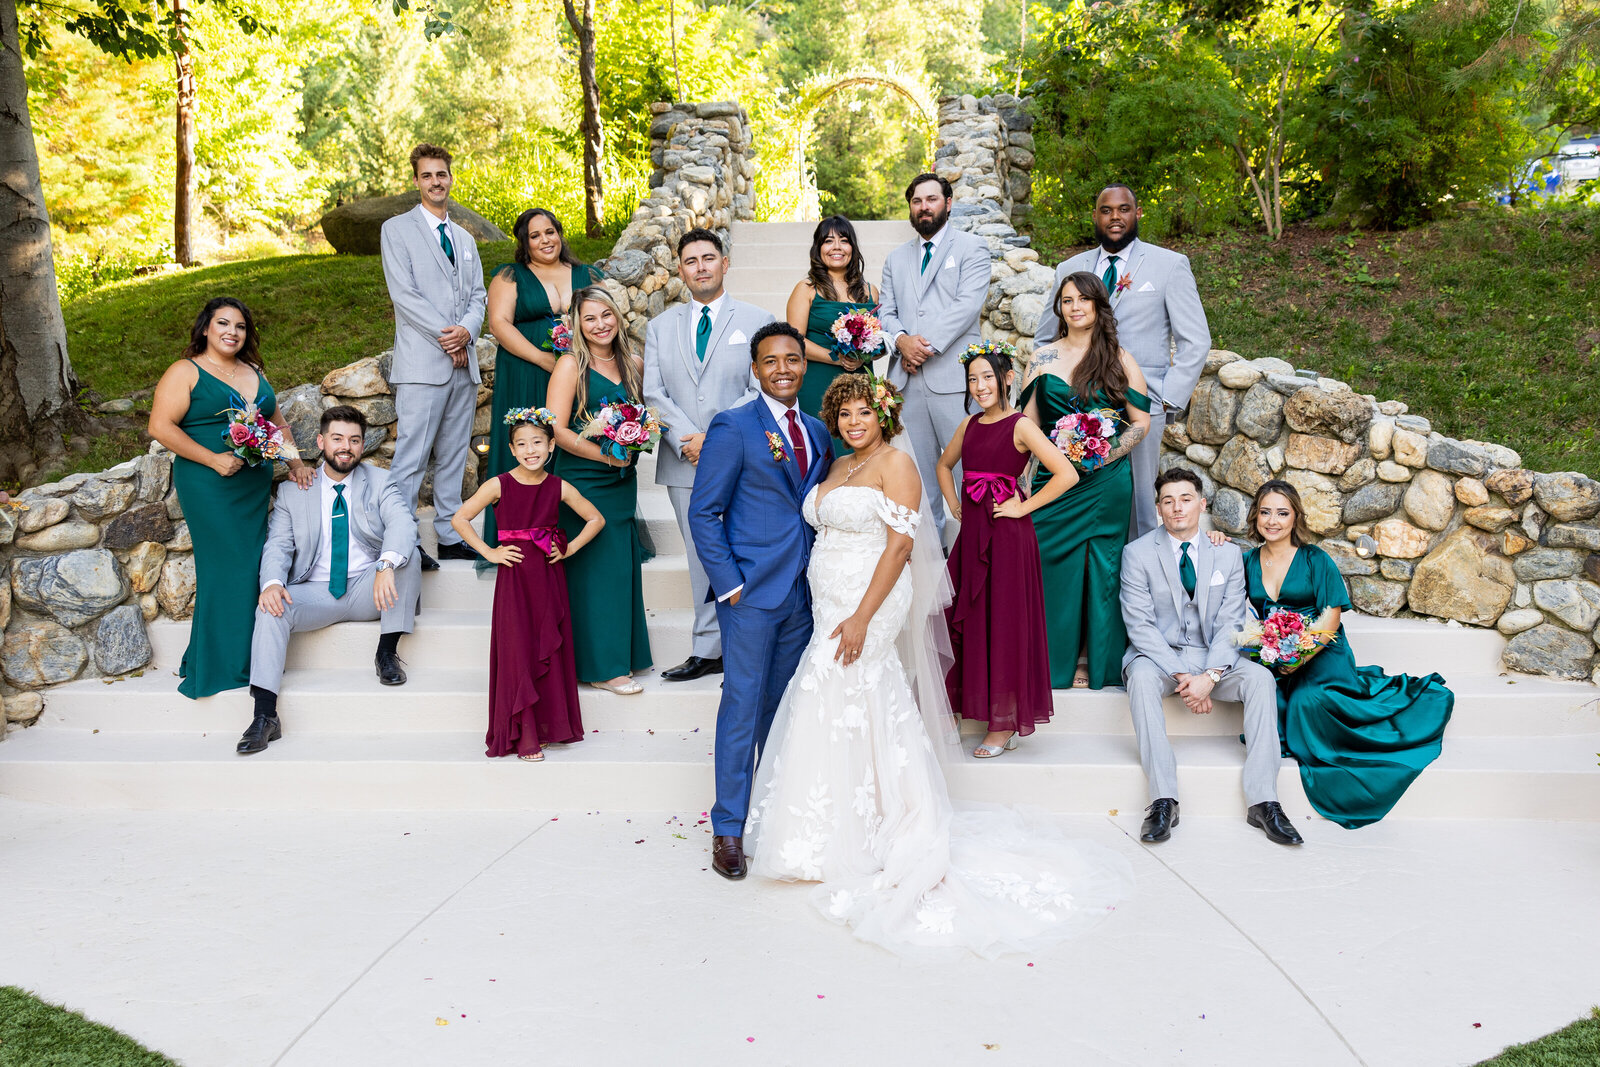 Large wedding party poses for picture with people staggered on stairs and bride and groom standing in the middle. Wedding photo by philippe studio pro, based in Sacramento.